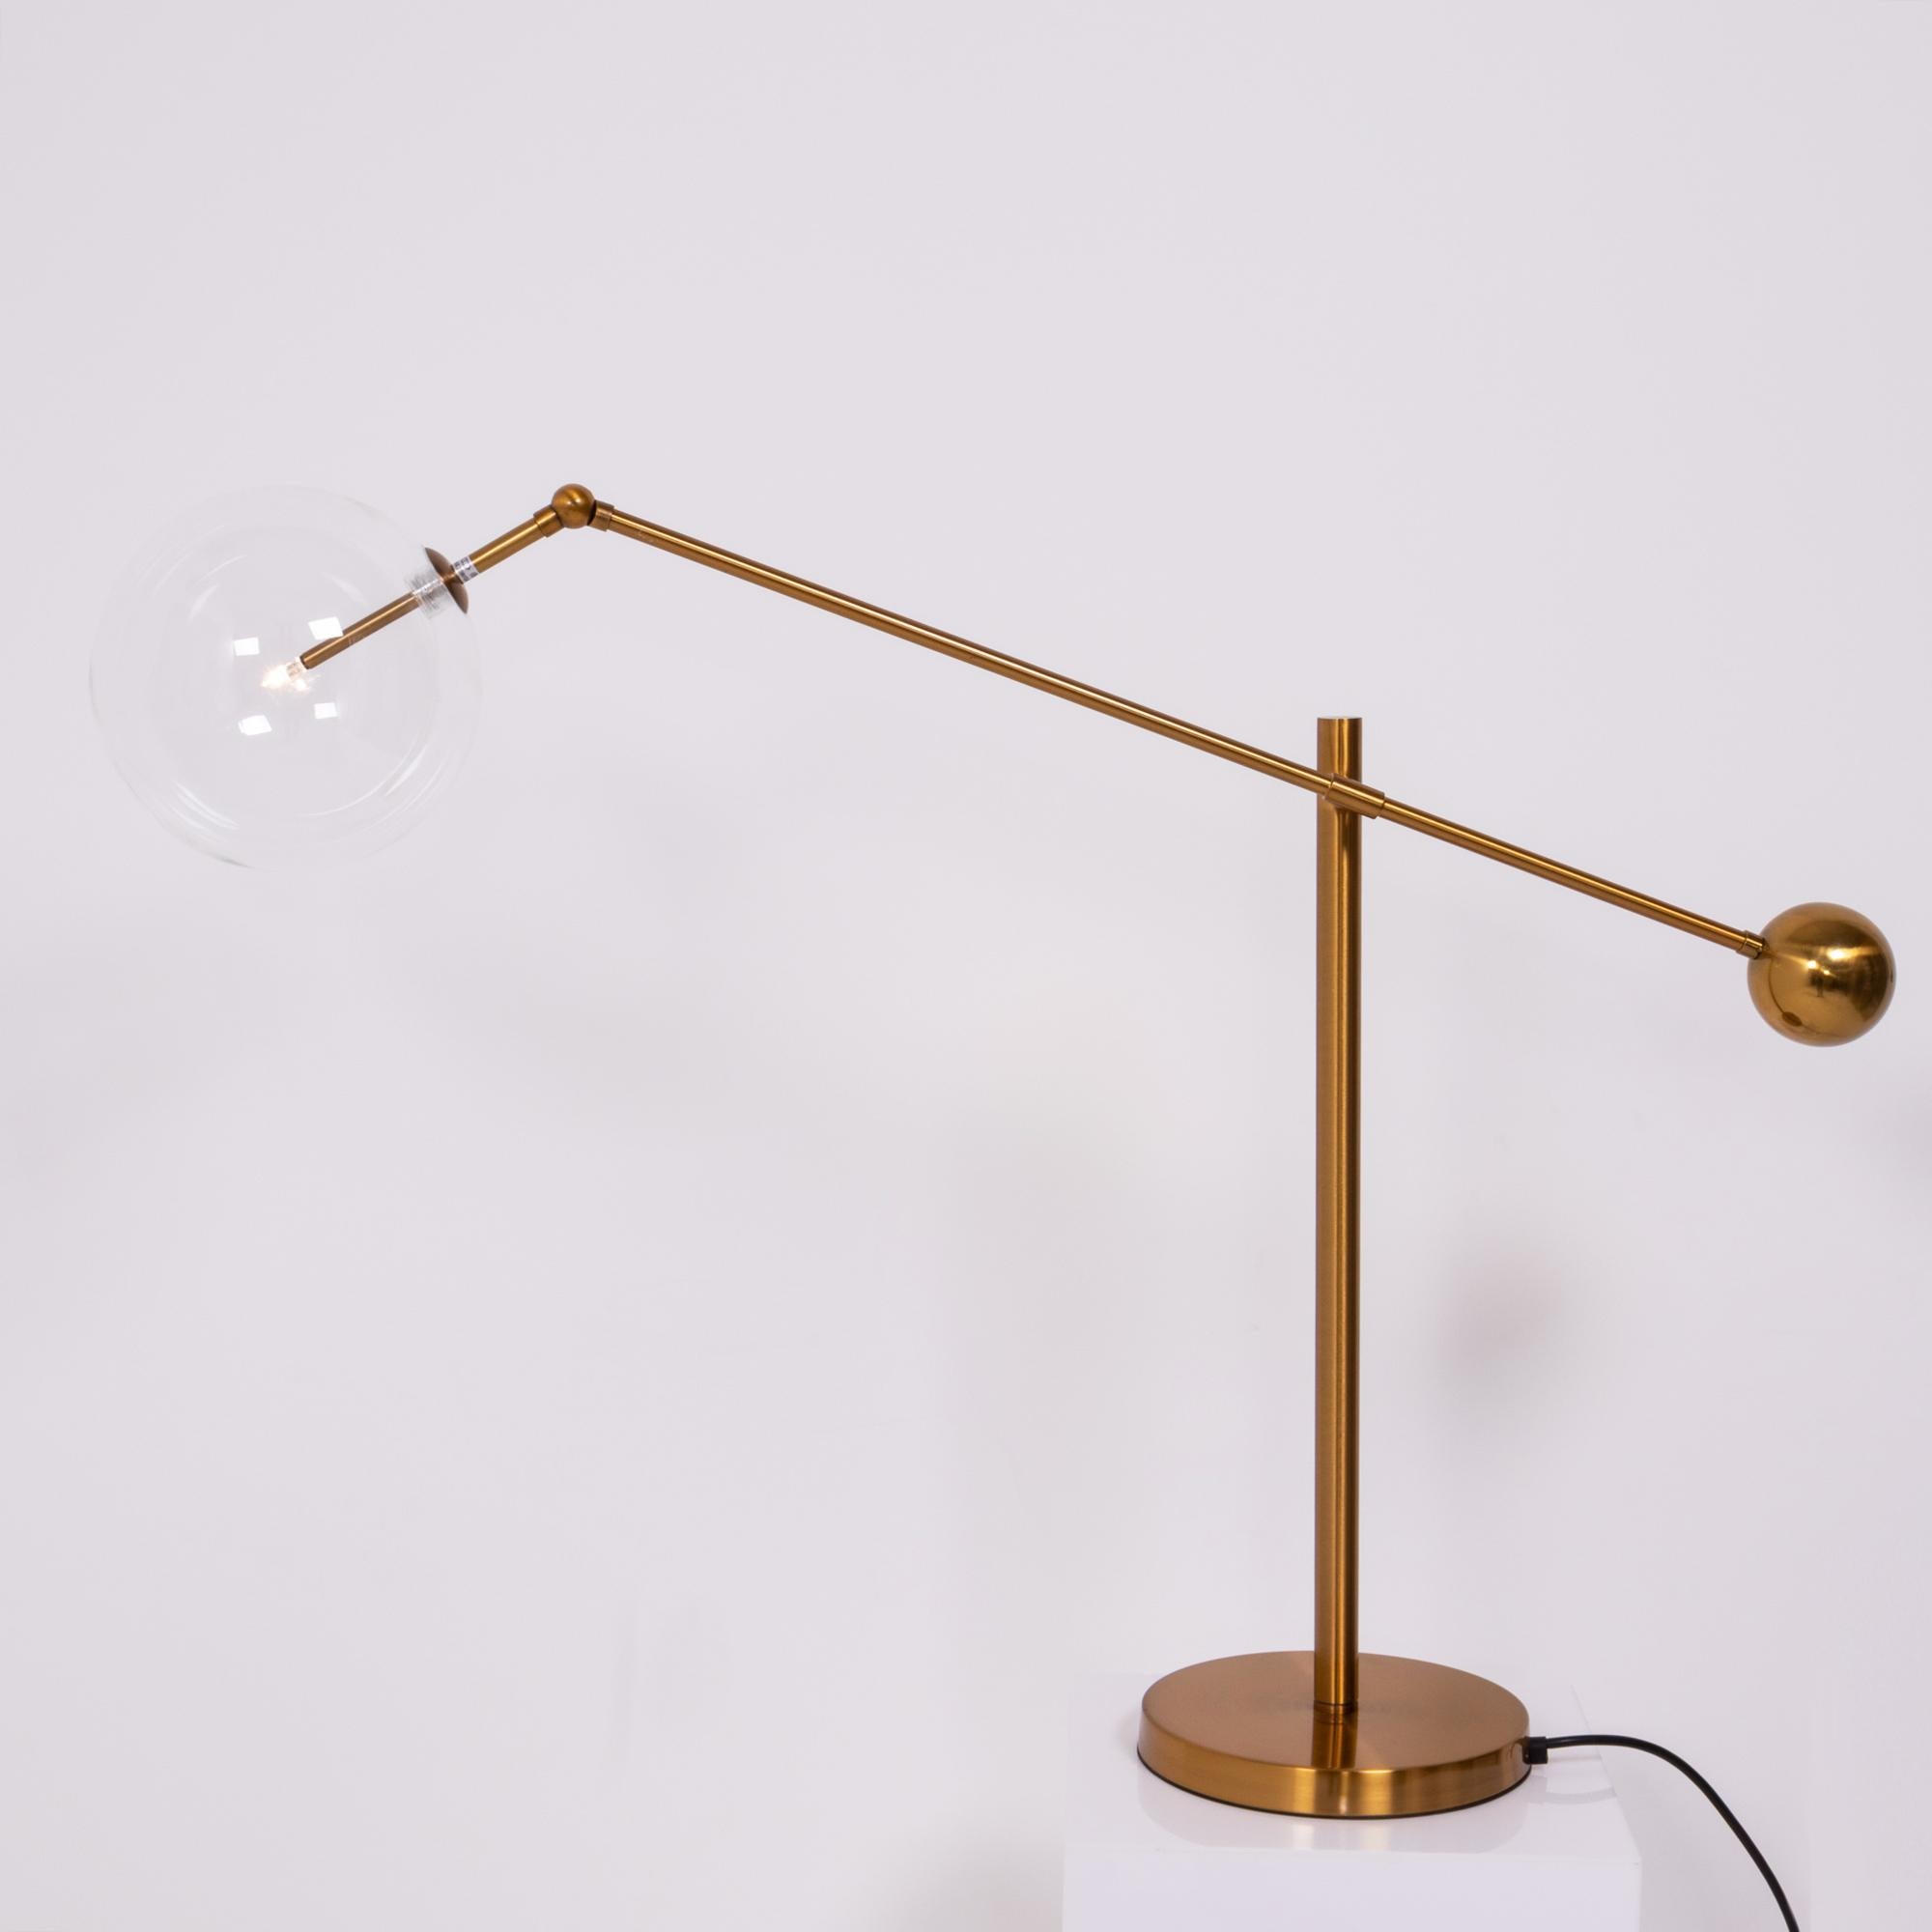 Inspired by mid century Italian design, this table lamp features a striking globe shade in clear glass.

Sitting on a round brass base, the arm cantilevers off of the stand and is weighted at the end with a brass sphere.

The lamp has a UK plug